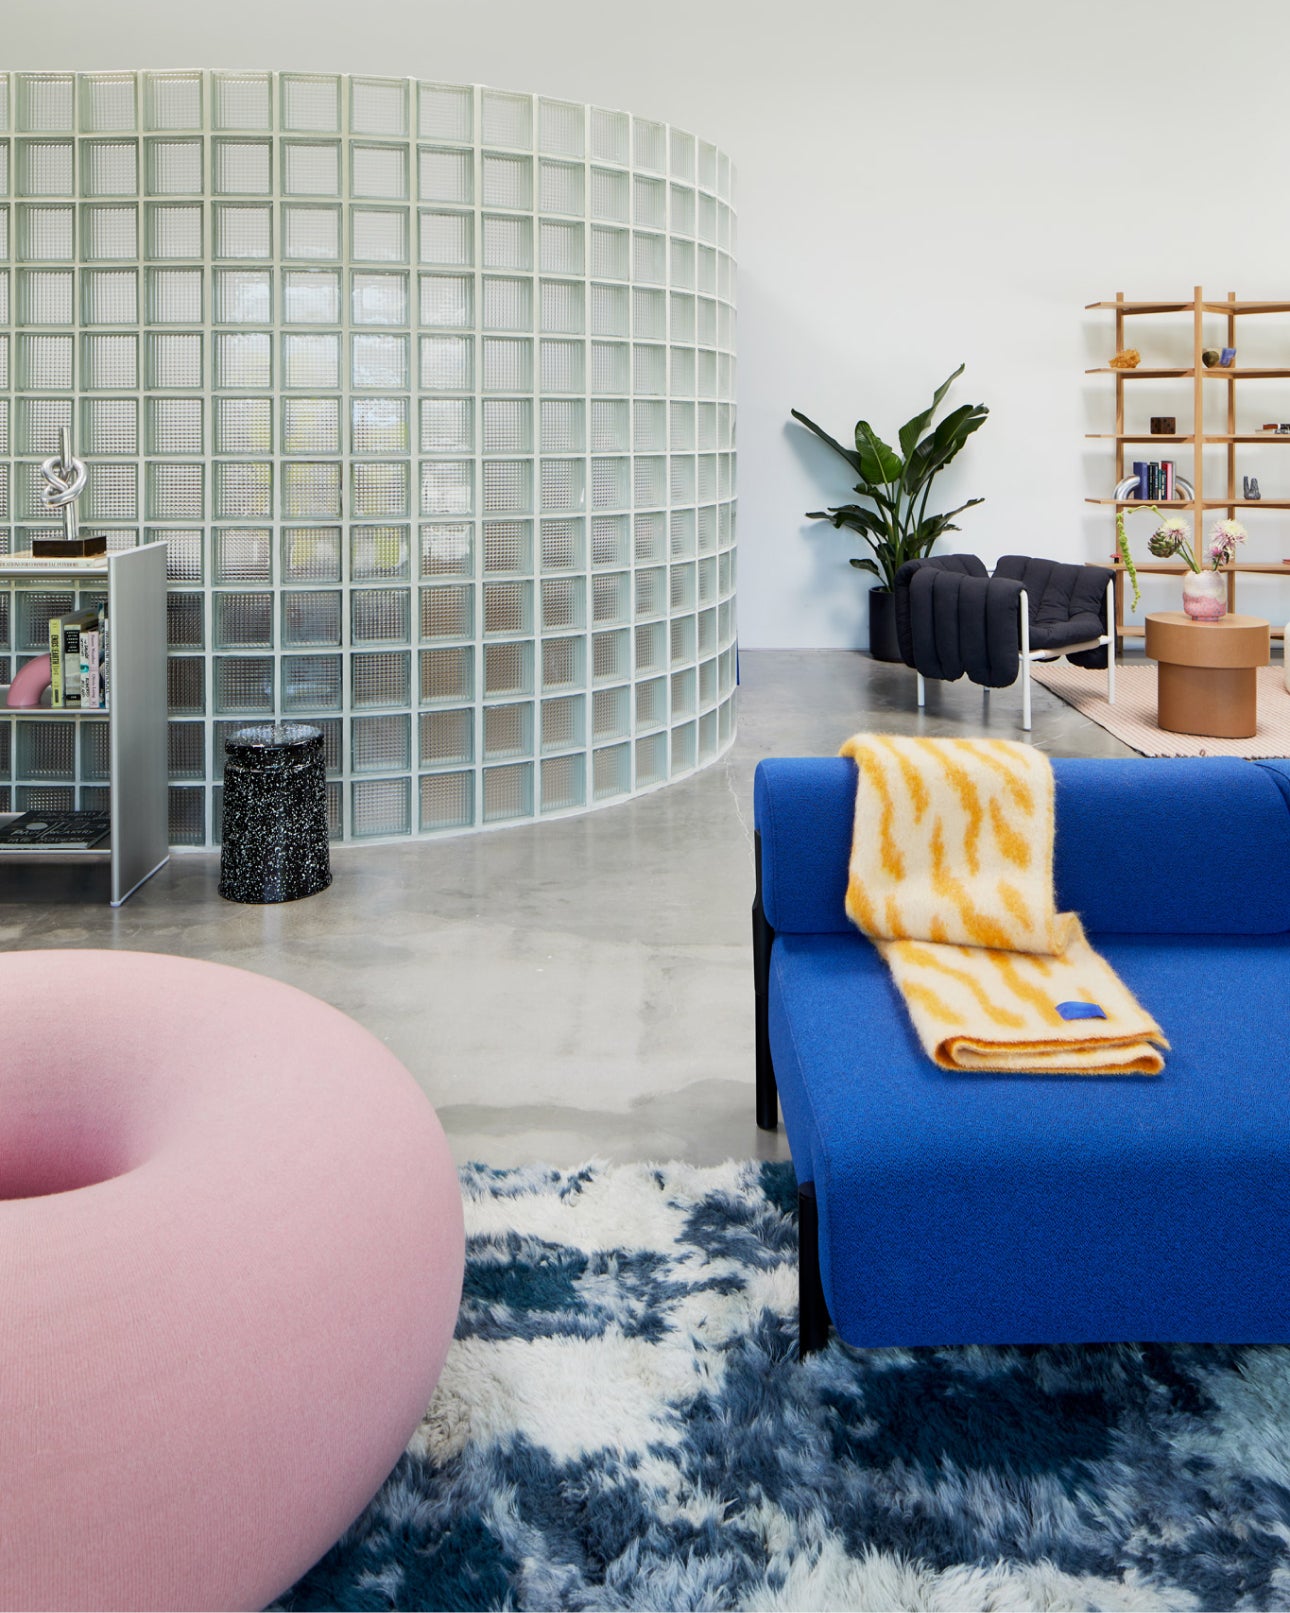 Hem - A view inside our LA Showroom featuring Boa Pouf, Monster Rug, Monster Throw, Palo Sofa and more.